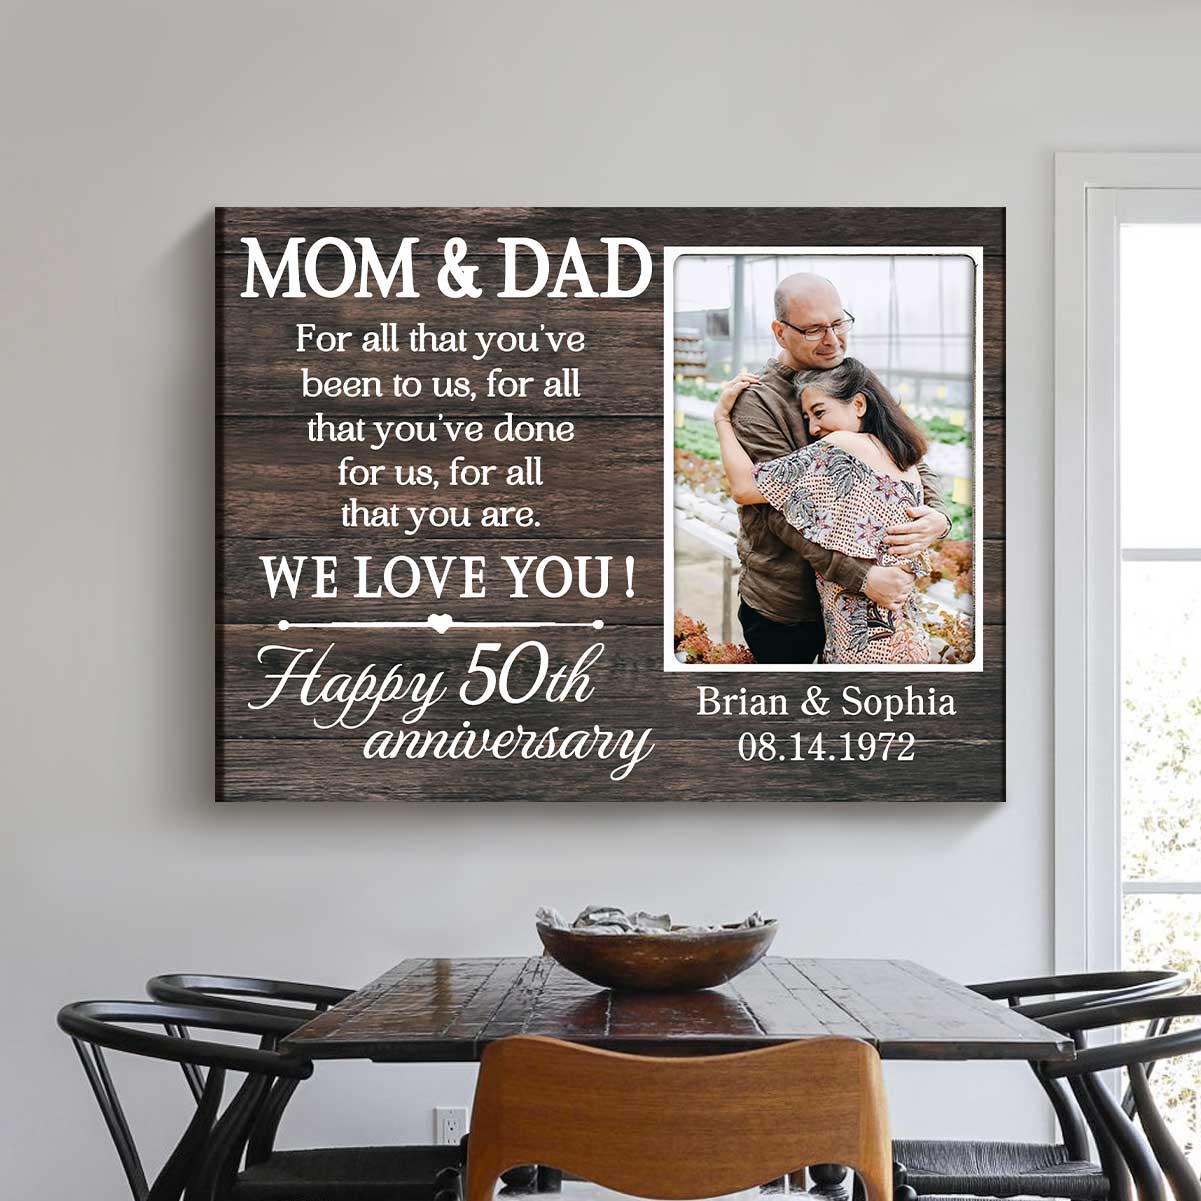 Anniversary Gift Ideas For Parents: 23 Creative Gifts To Amaze Your Parents  | Anniversary frame, Anniversary gifts for parents, 50th anniversary gifts